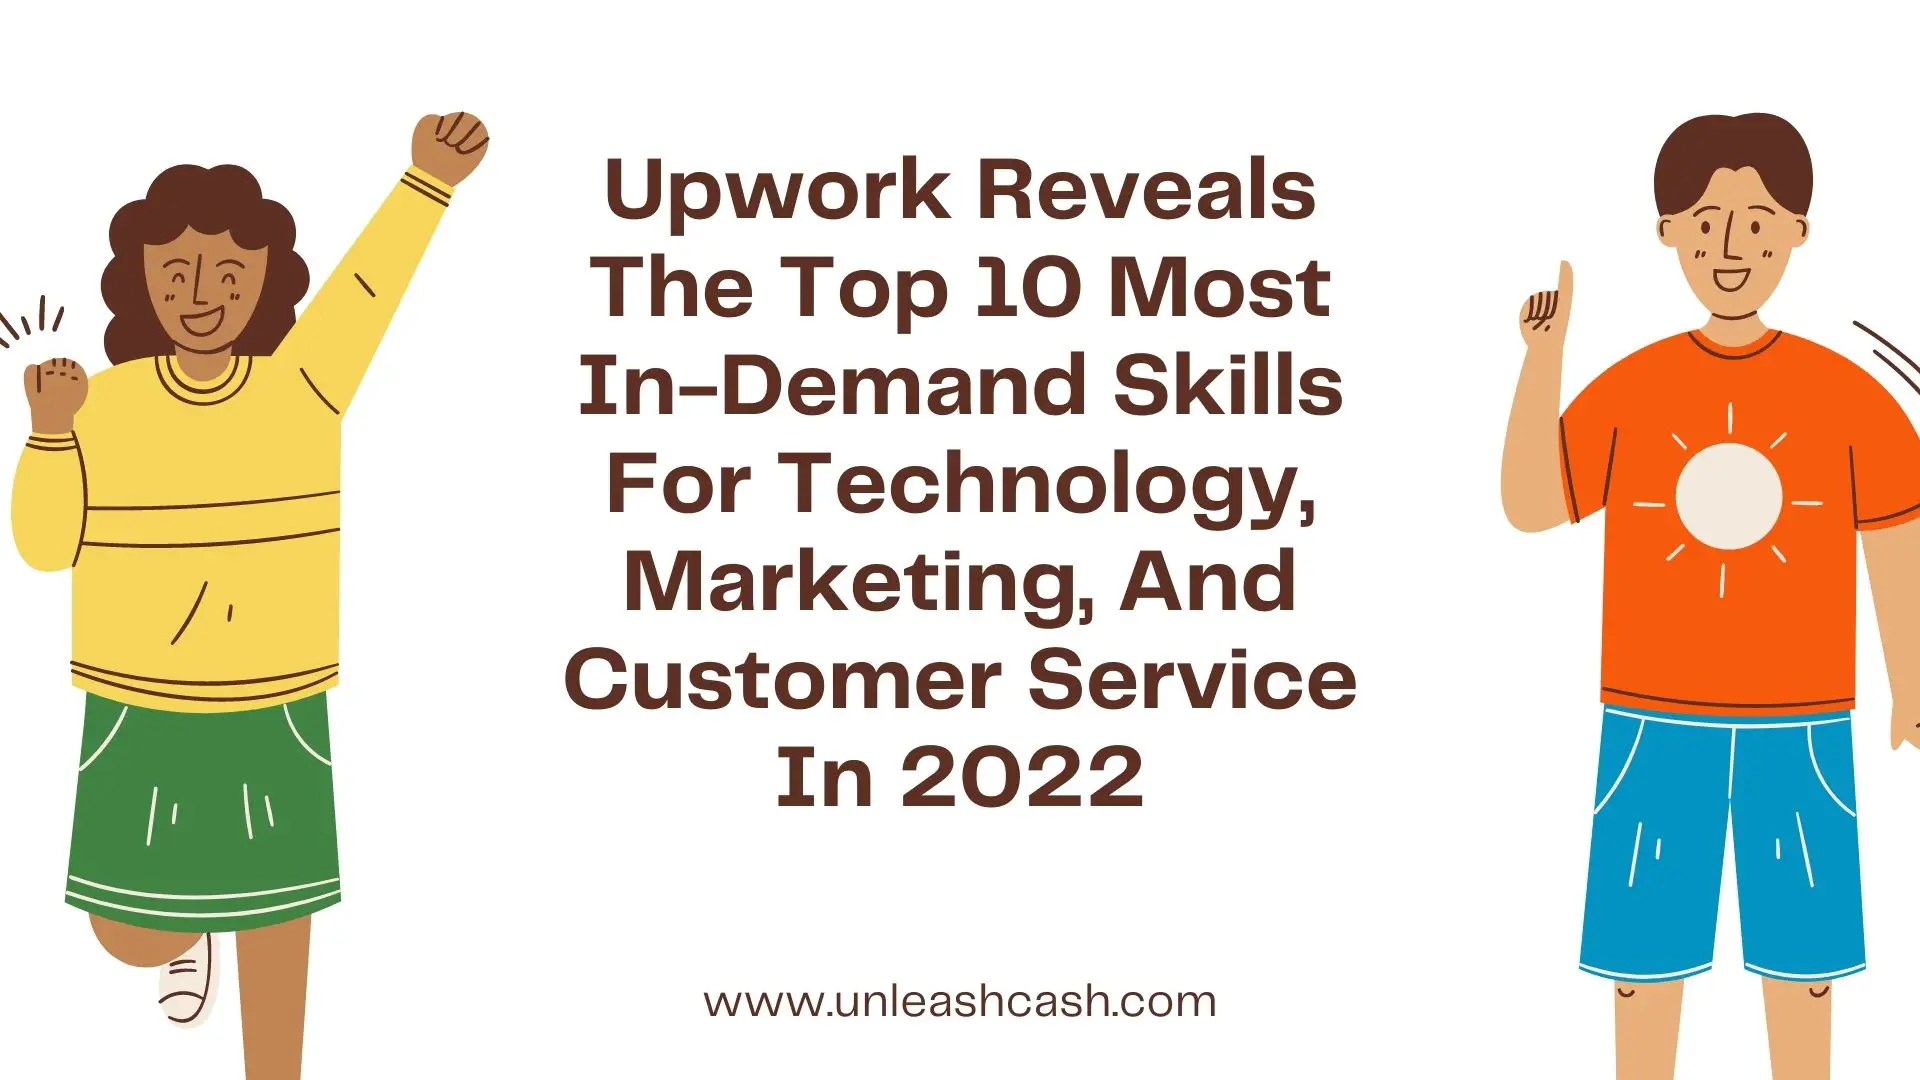 Upwork Reveals The Top 10 Most In-Demand Skills For Technology, Marketing, And Customer Service In 2022